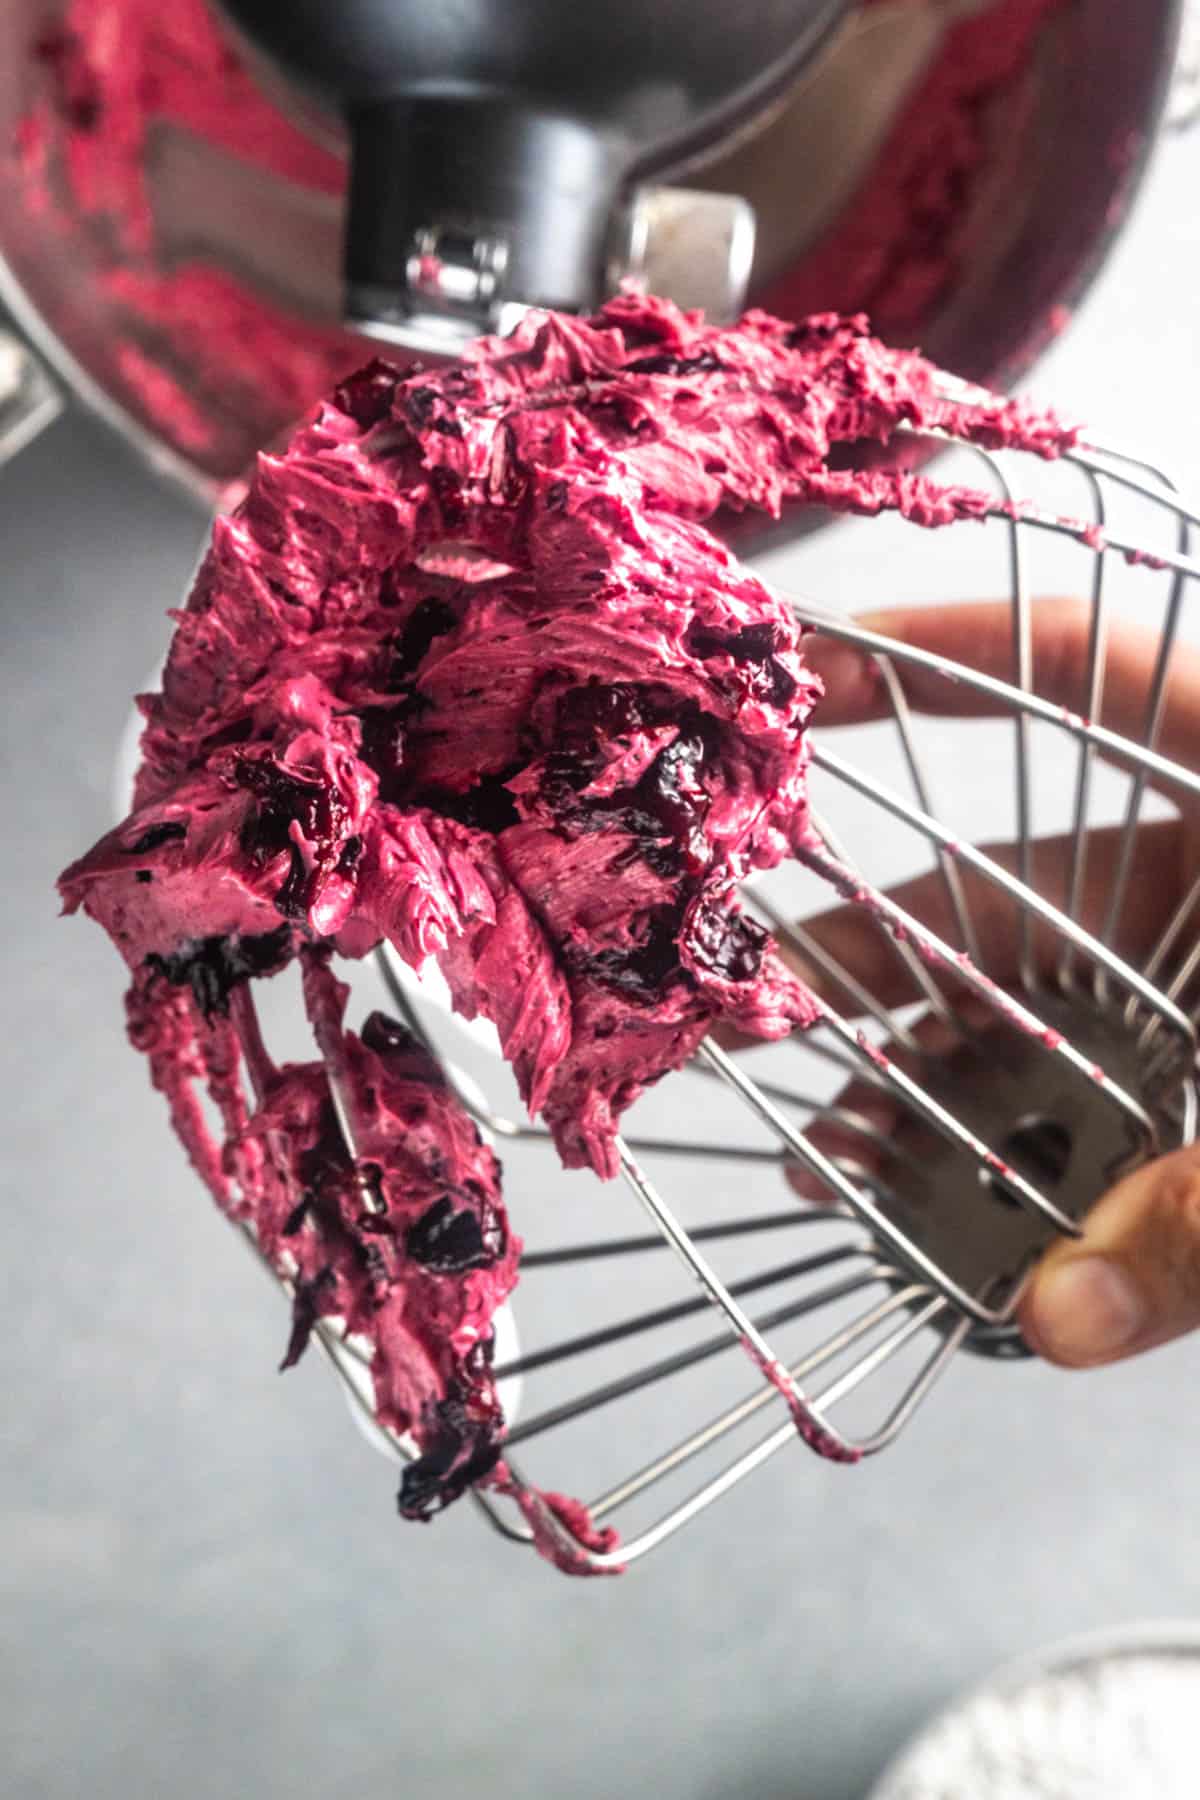 This image shows the blueberry frosting mixture once the blueberries and butter have been well combined, but before the sugar, vanilla extract, and salt have been added. It a very deep, rich purple.